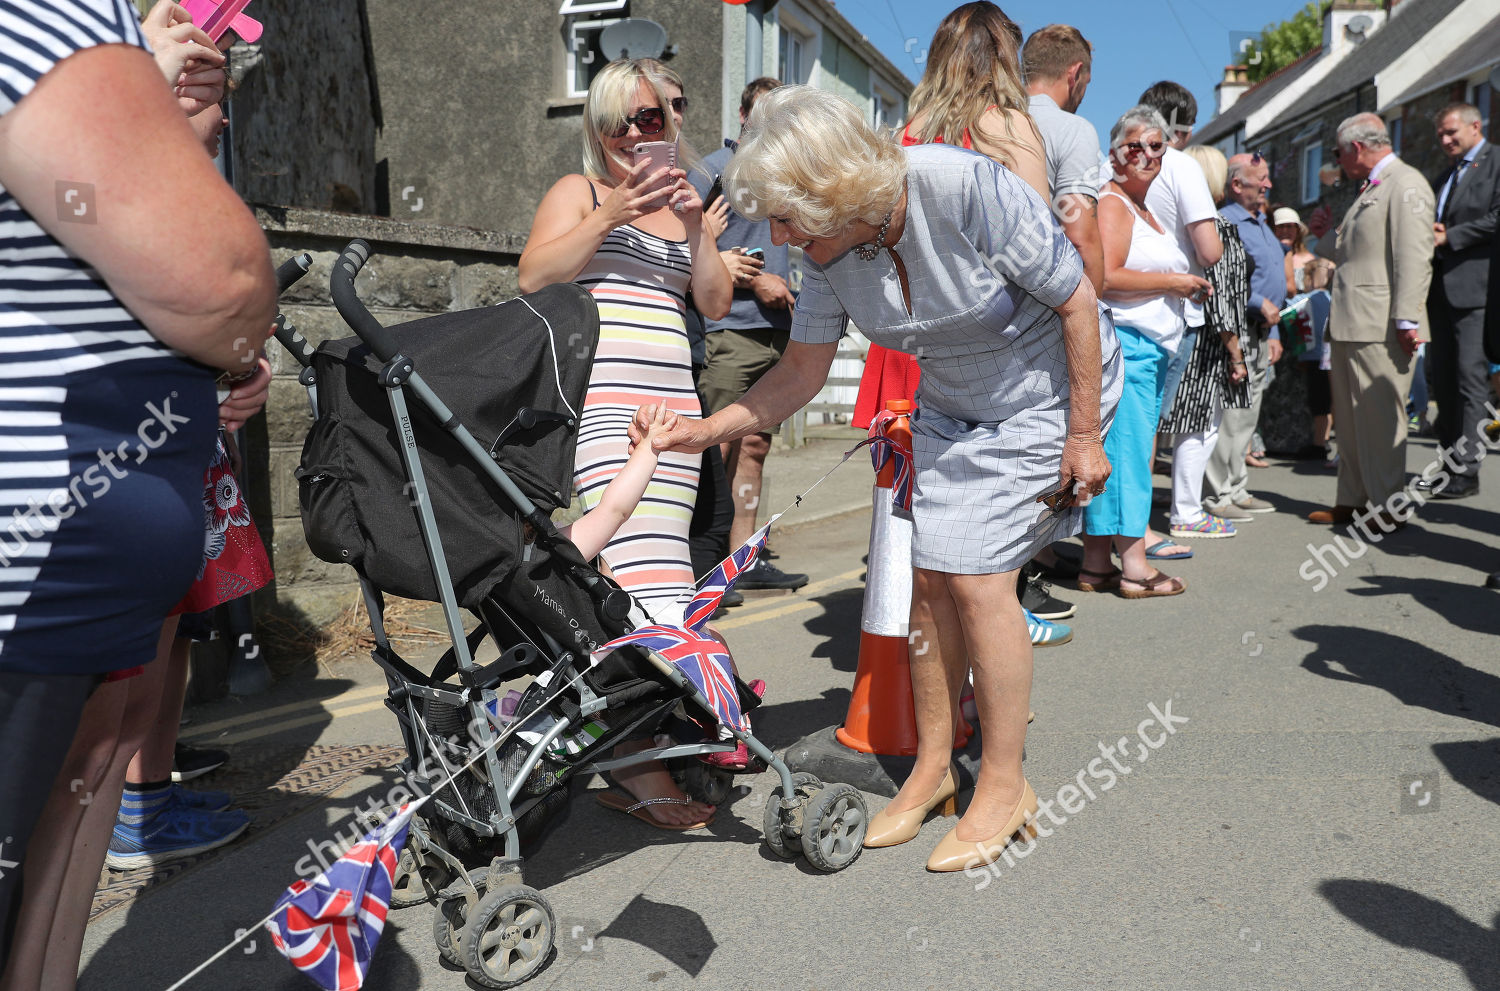 prince-charles-and-camilla-duchess-of-cornwall-visit-to-wales-uk-shutterstock-editorial-9734417c.jpg